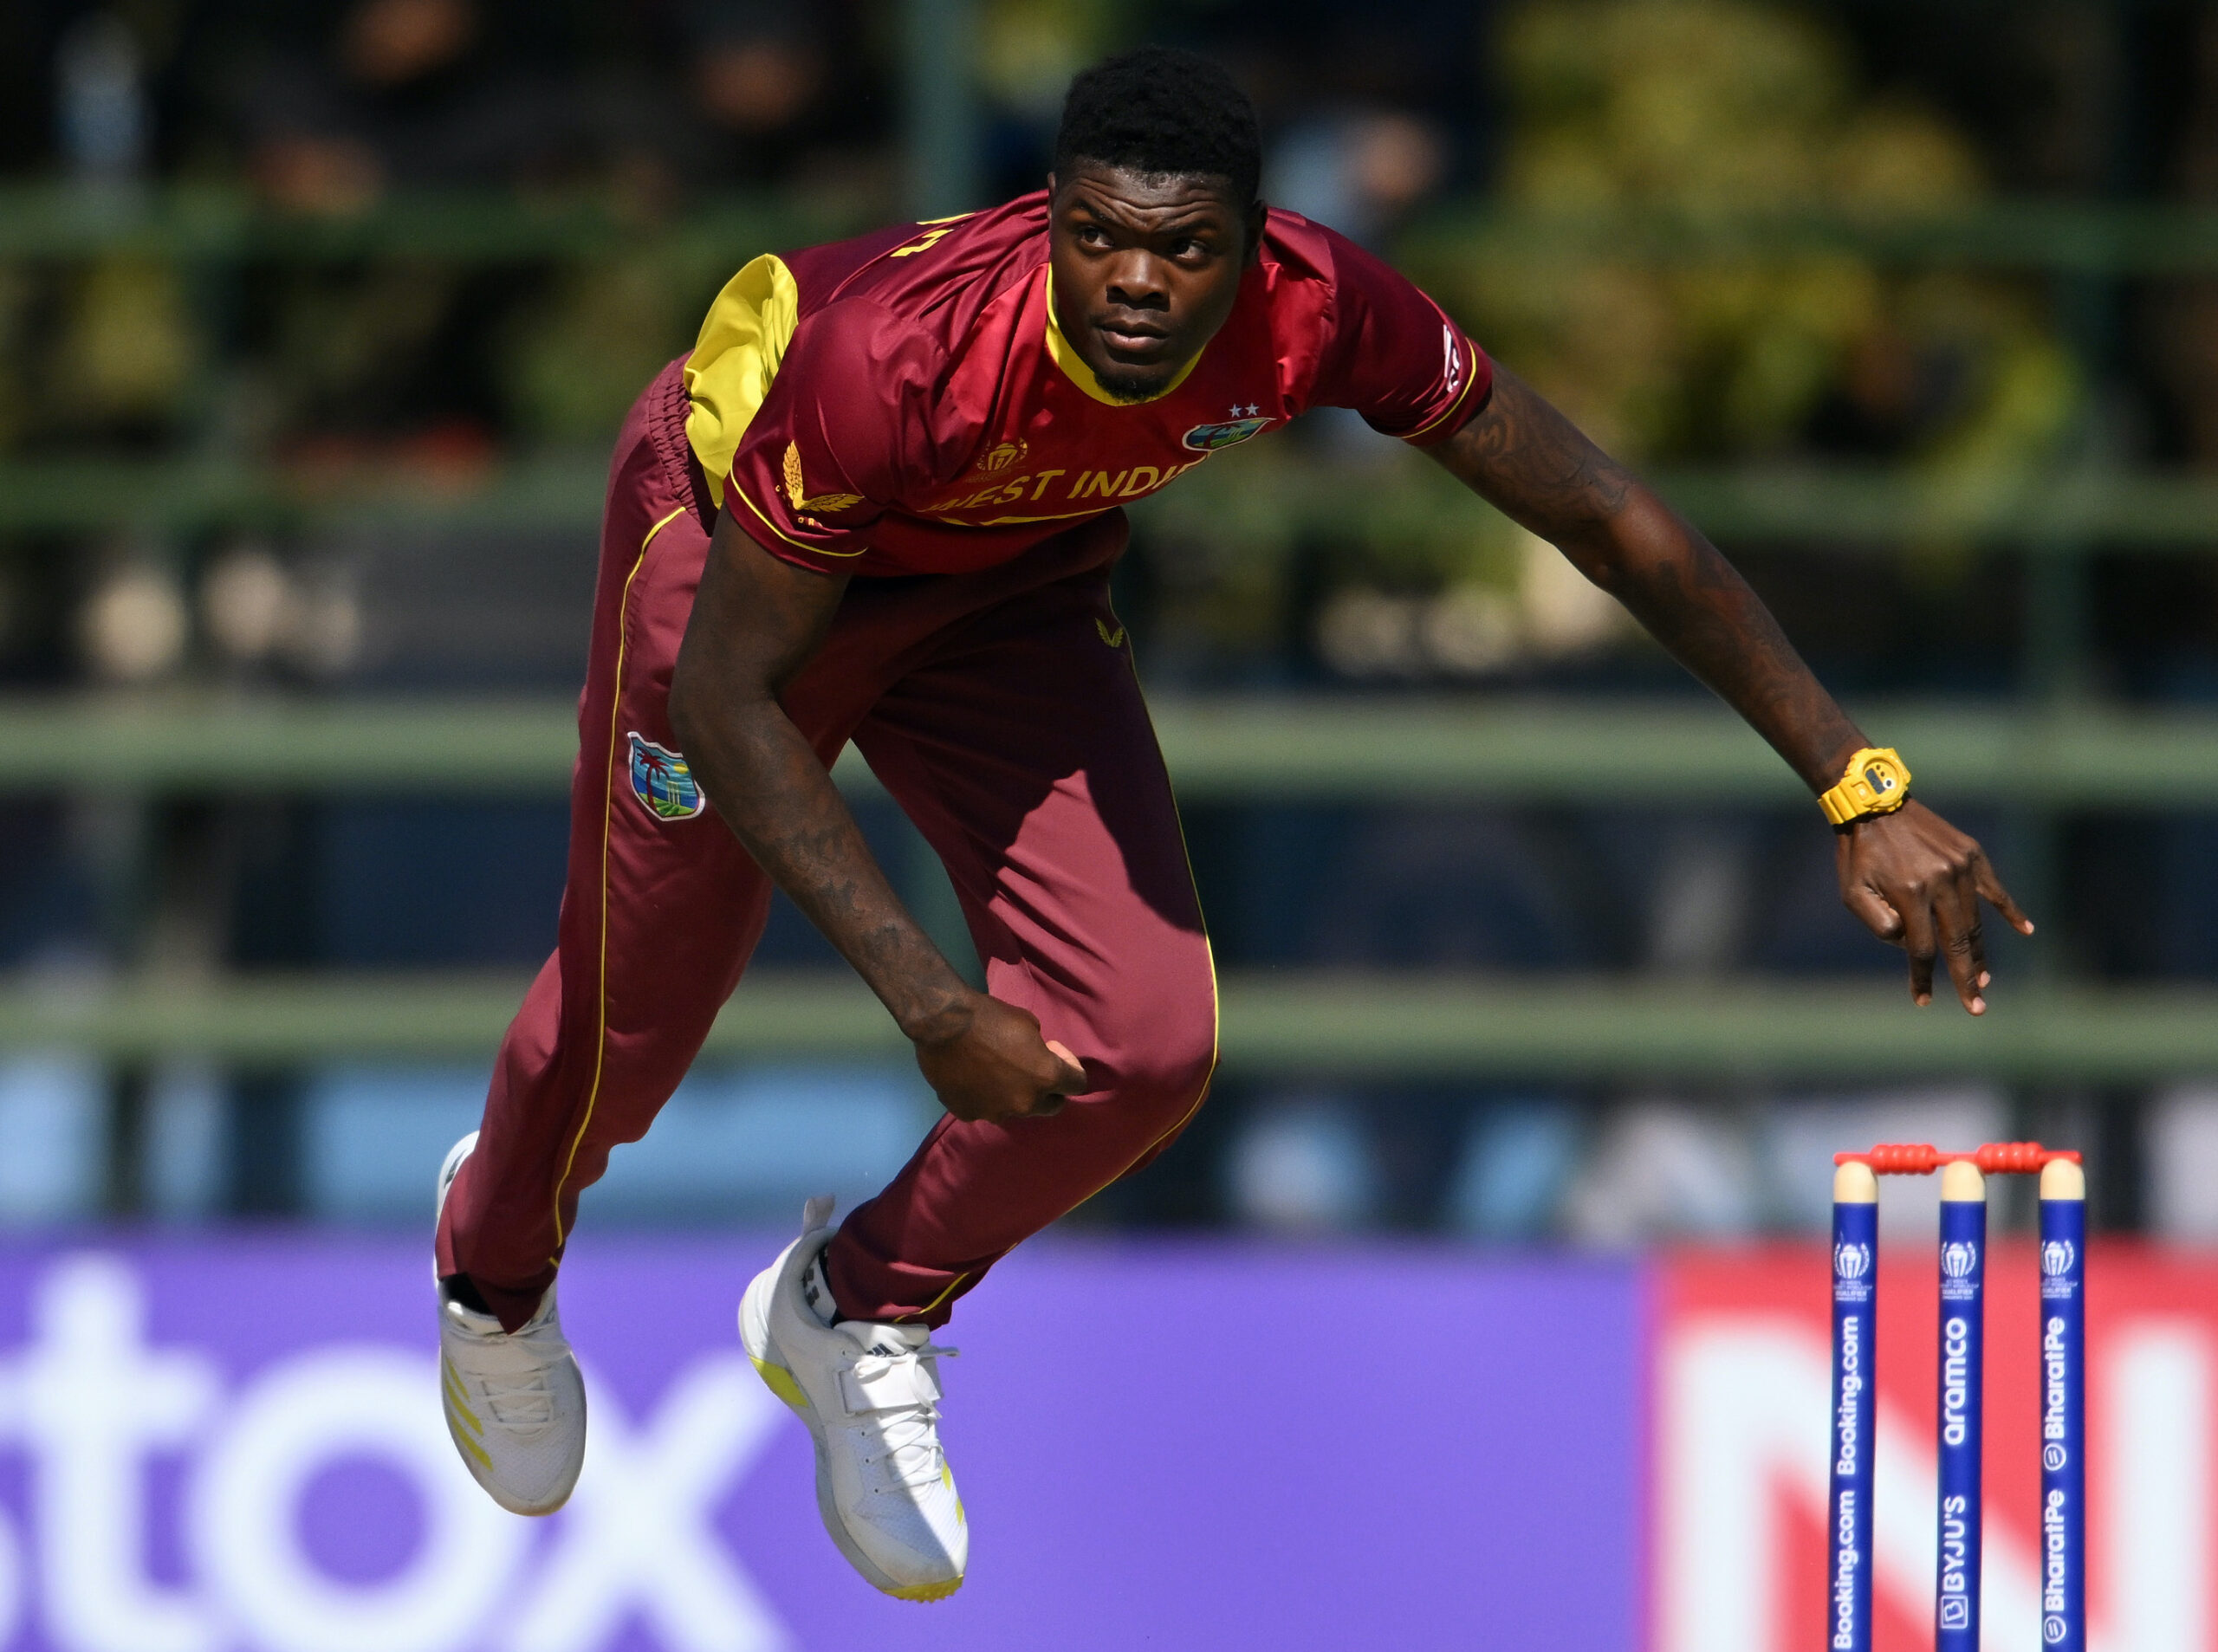 Alzarri Joseph named as vice captain as West Indies name squad for CG United ODI Series vs England